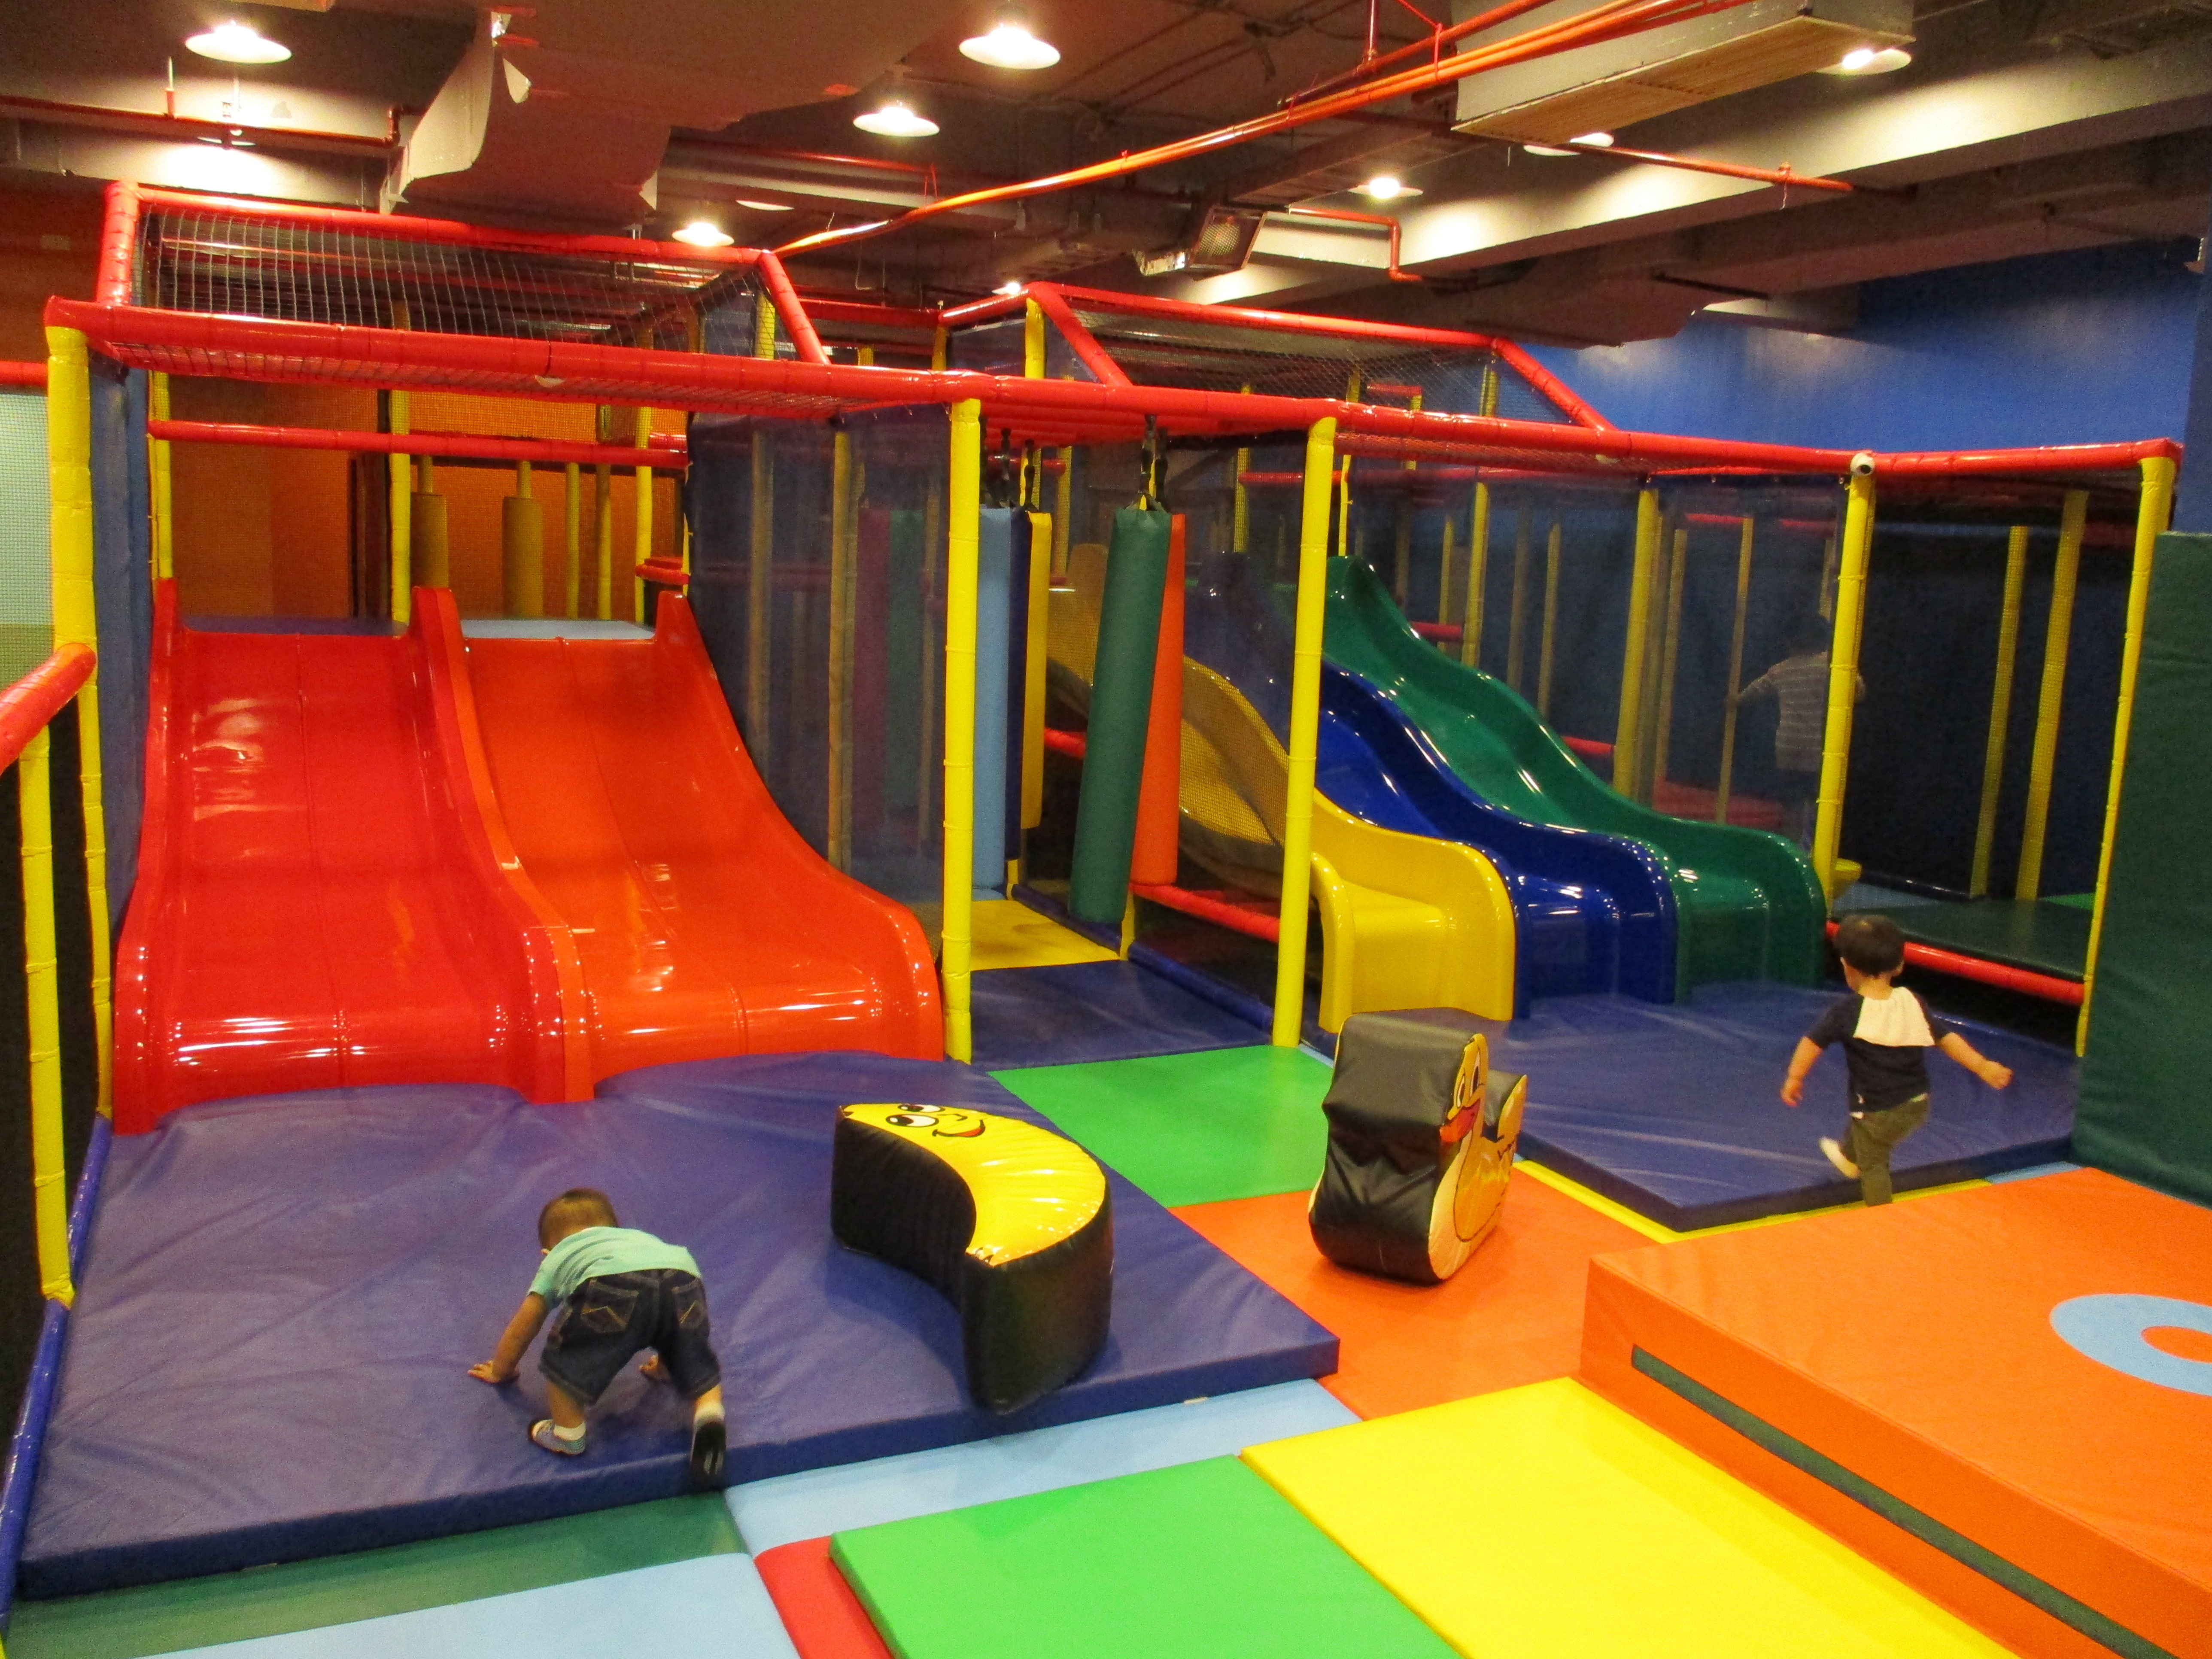 How to Start a Children's Indoor Play Area Business